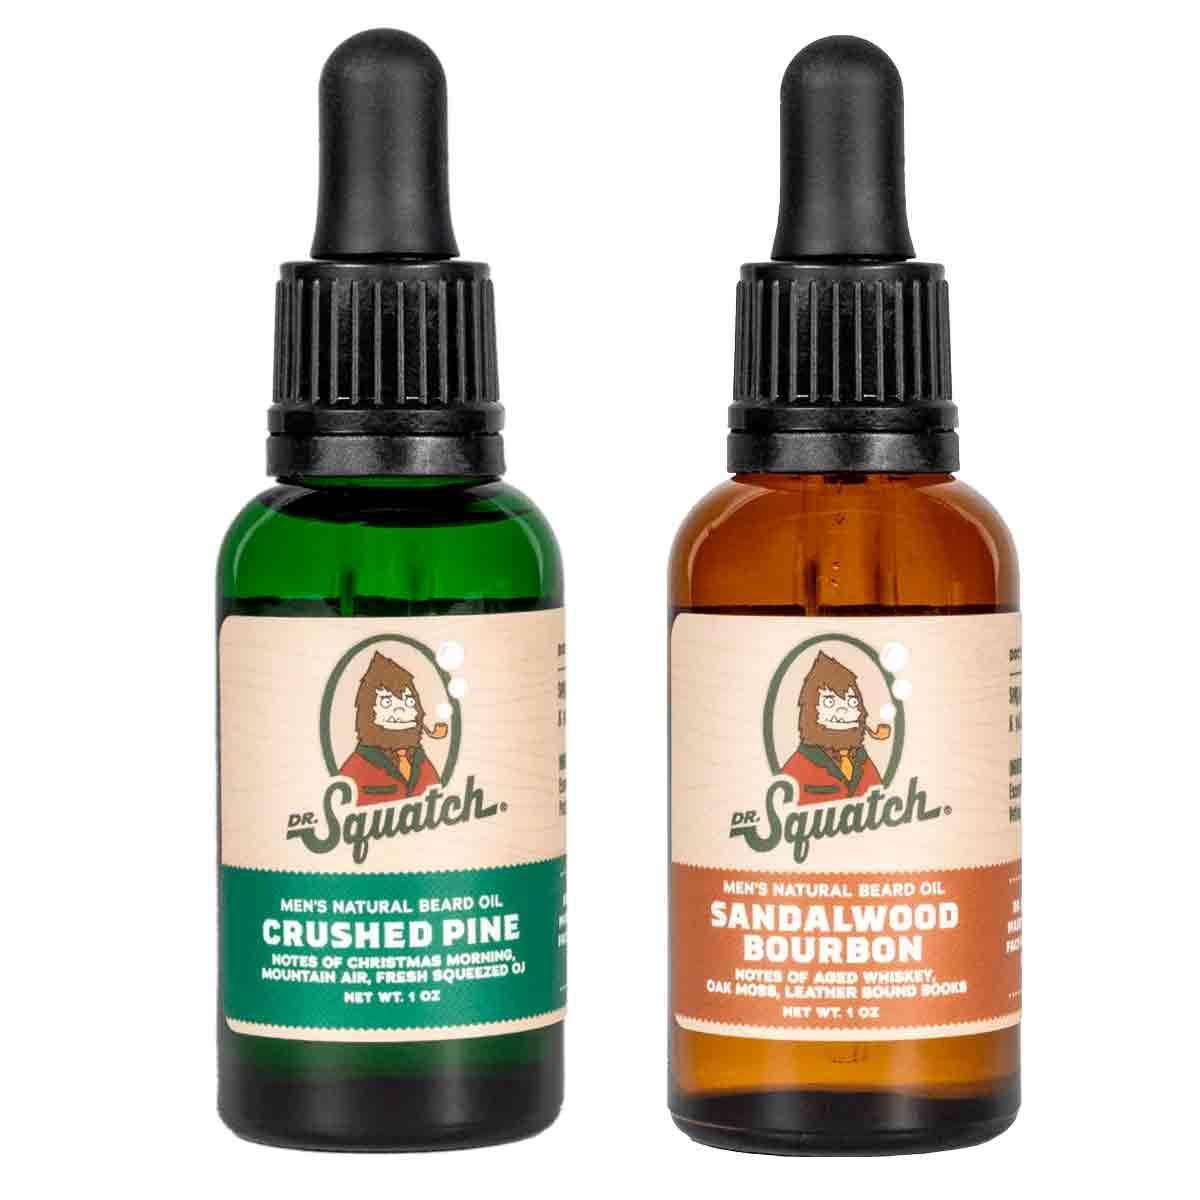 Dr. Squatch Beard Oil Tutorial  Are you taking proper care of